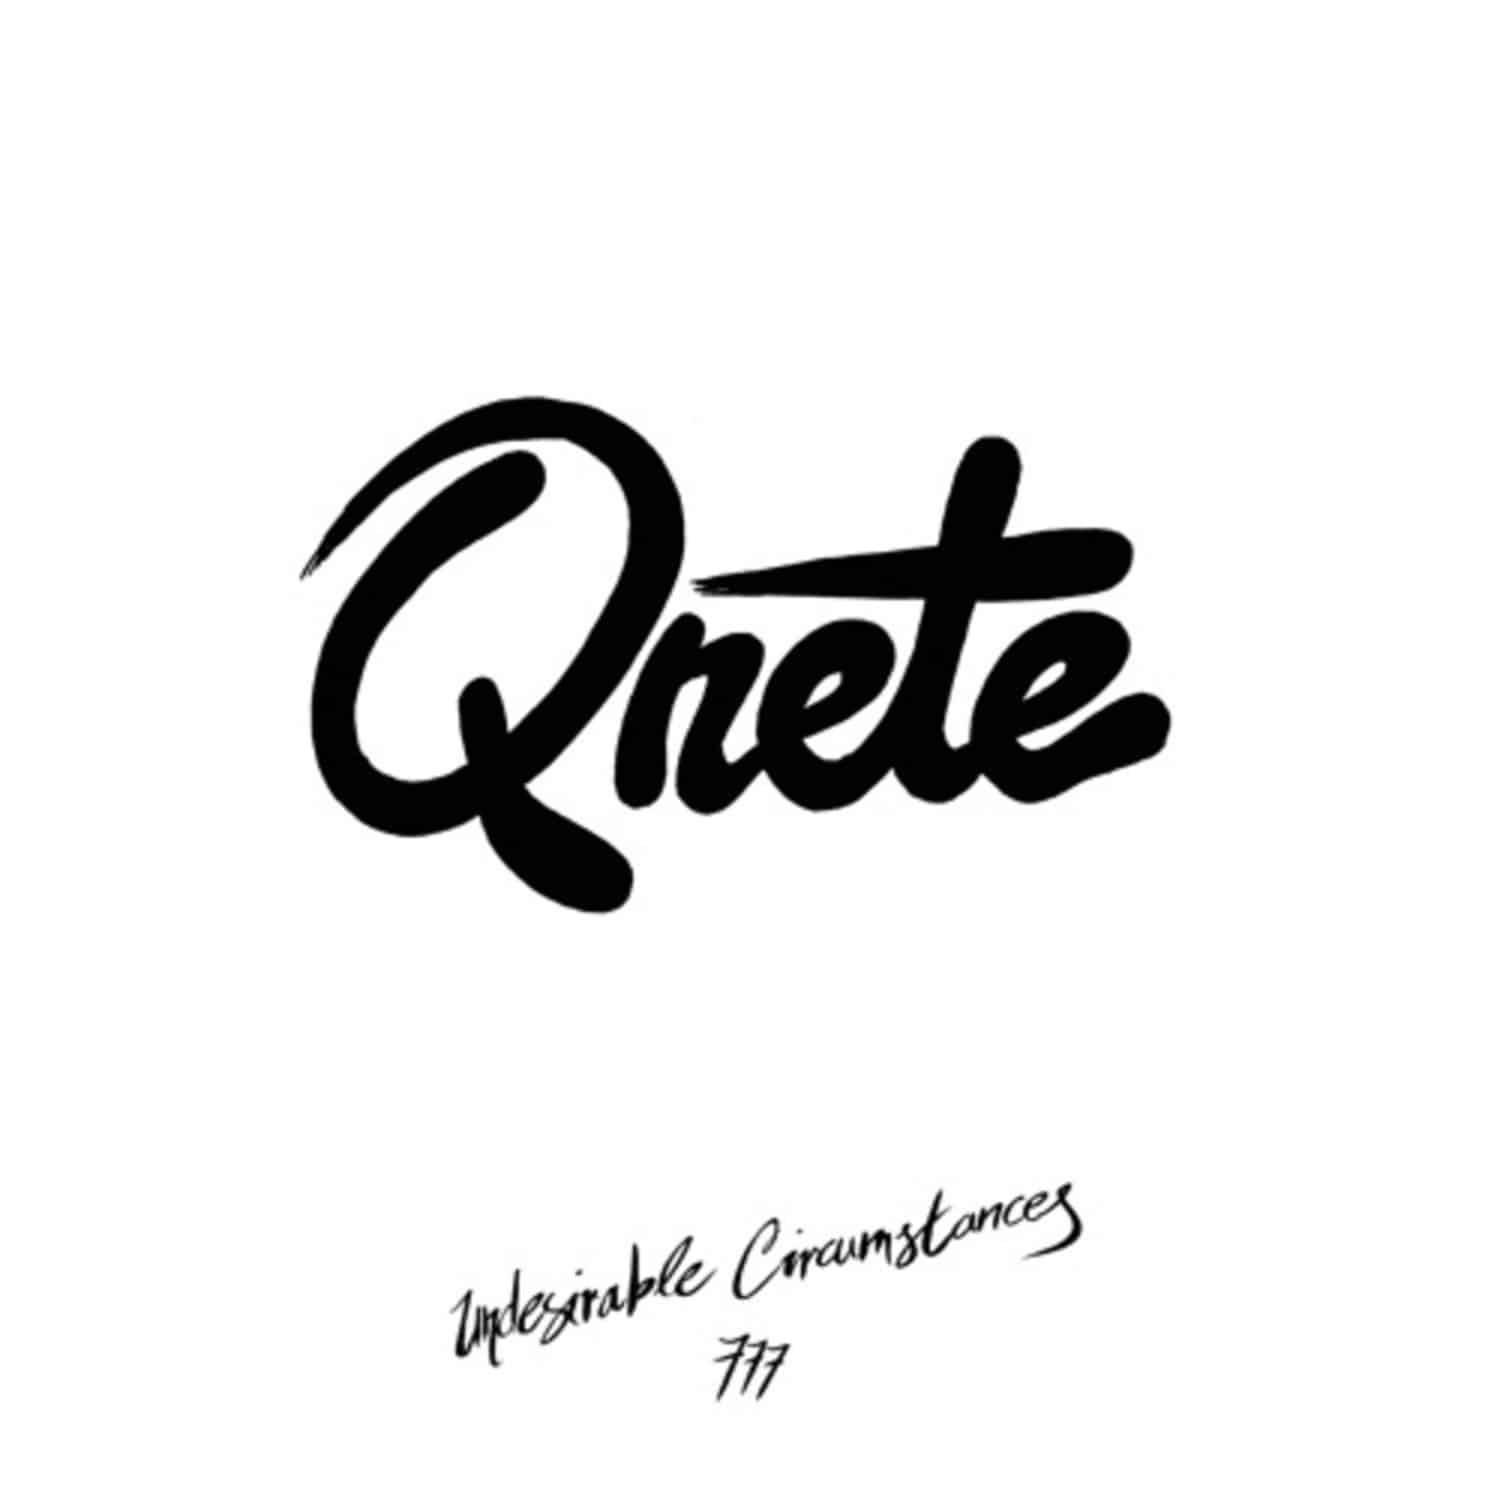 Qnete - UNDESIRABLE CIRCUMSTANCES 